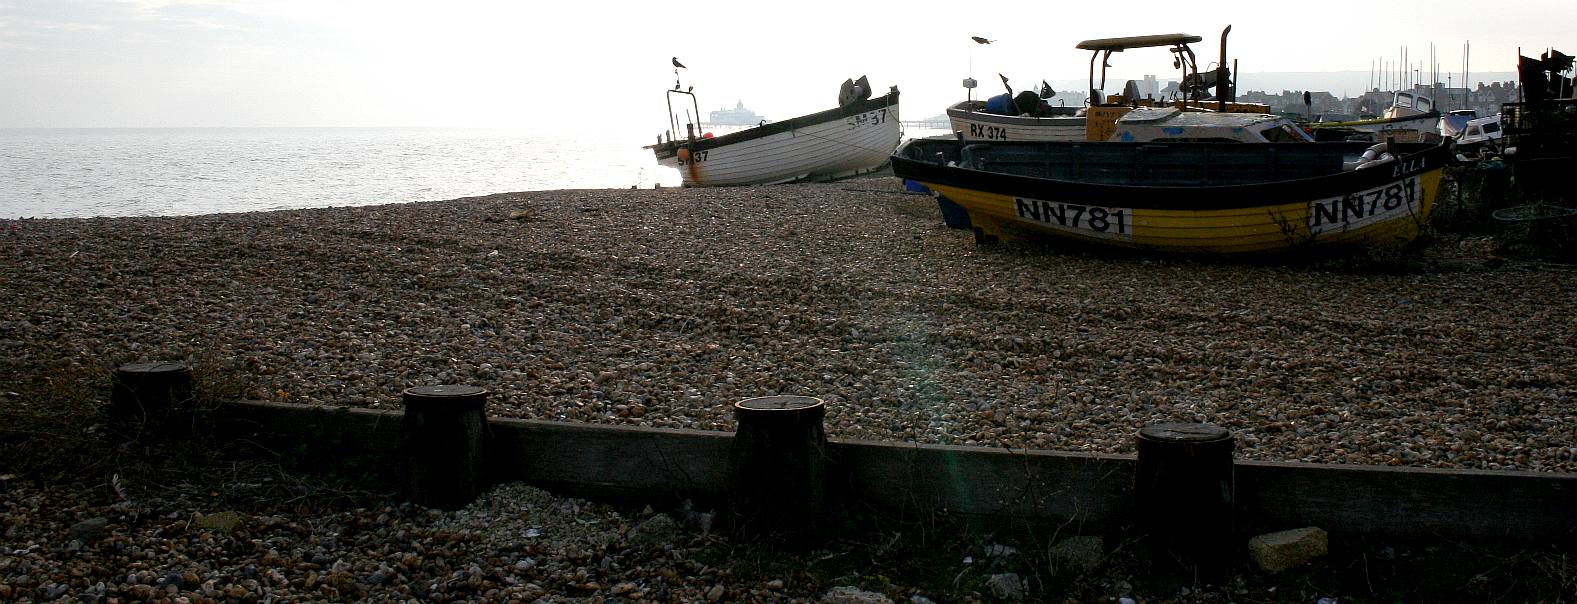 Eastbourne marine parade is an underused resource in terms of food security and blue growth